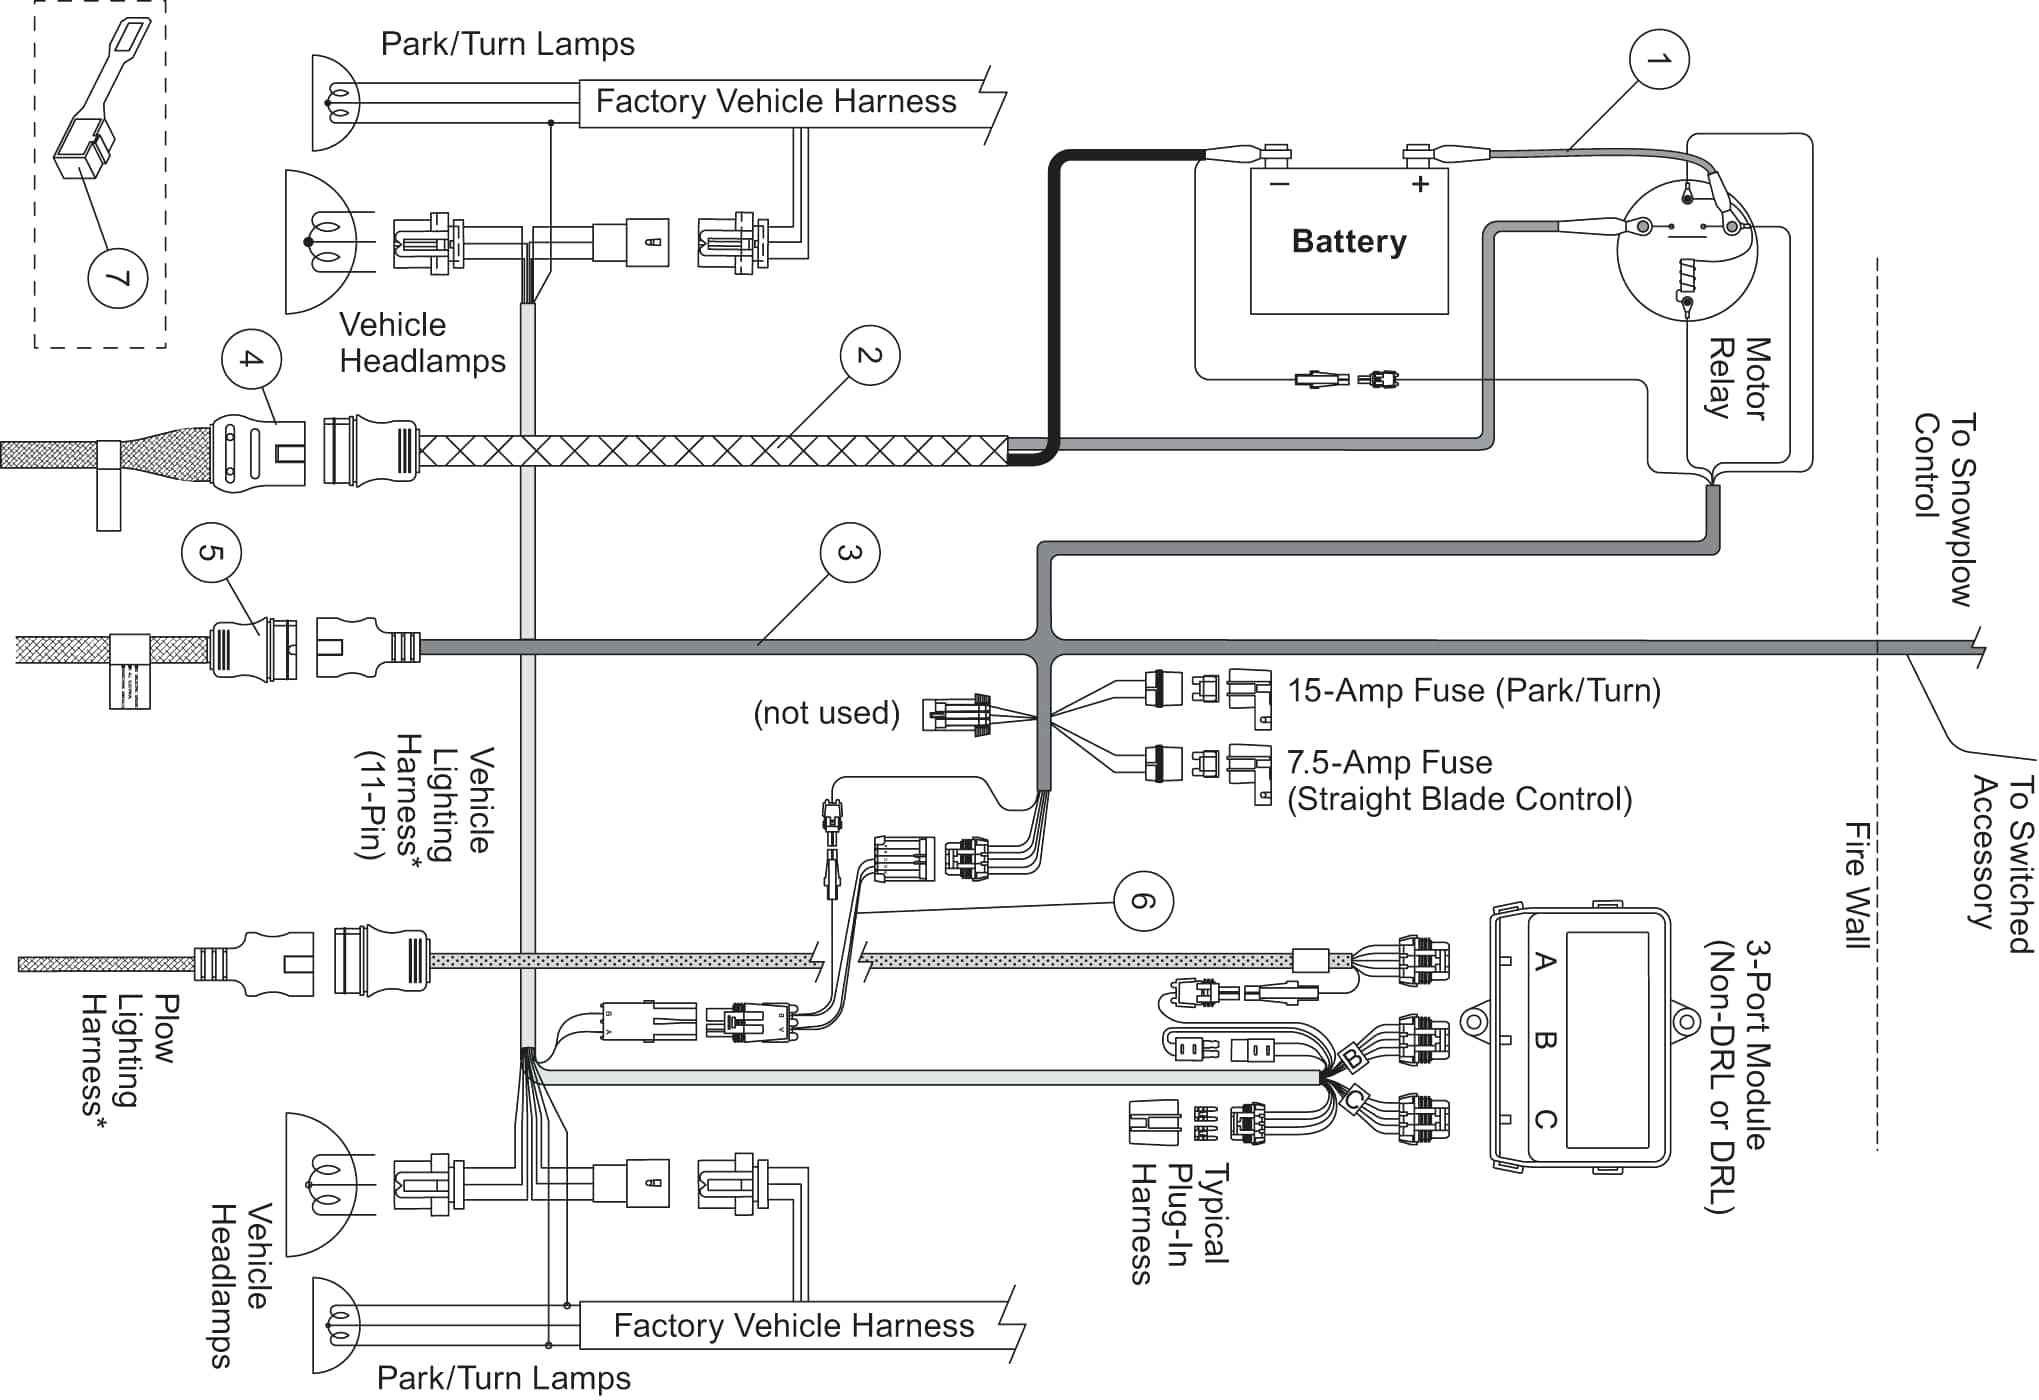 Western Plow Light Wiring Diagram Meyers Snow Harness And Unimount - Boss Snow Plow Wiring Diagram